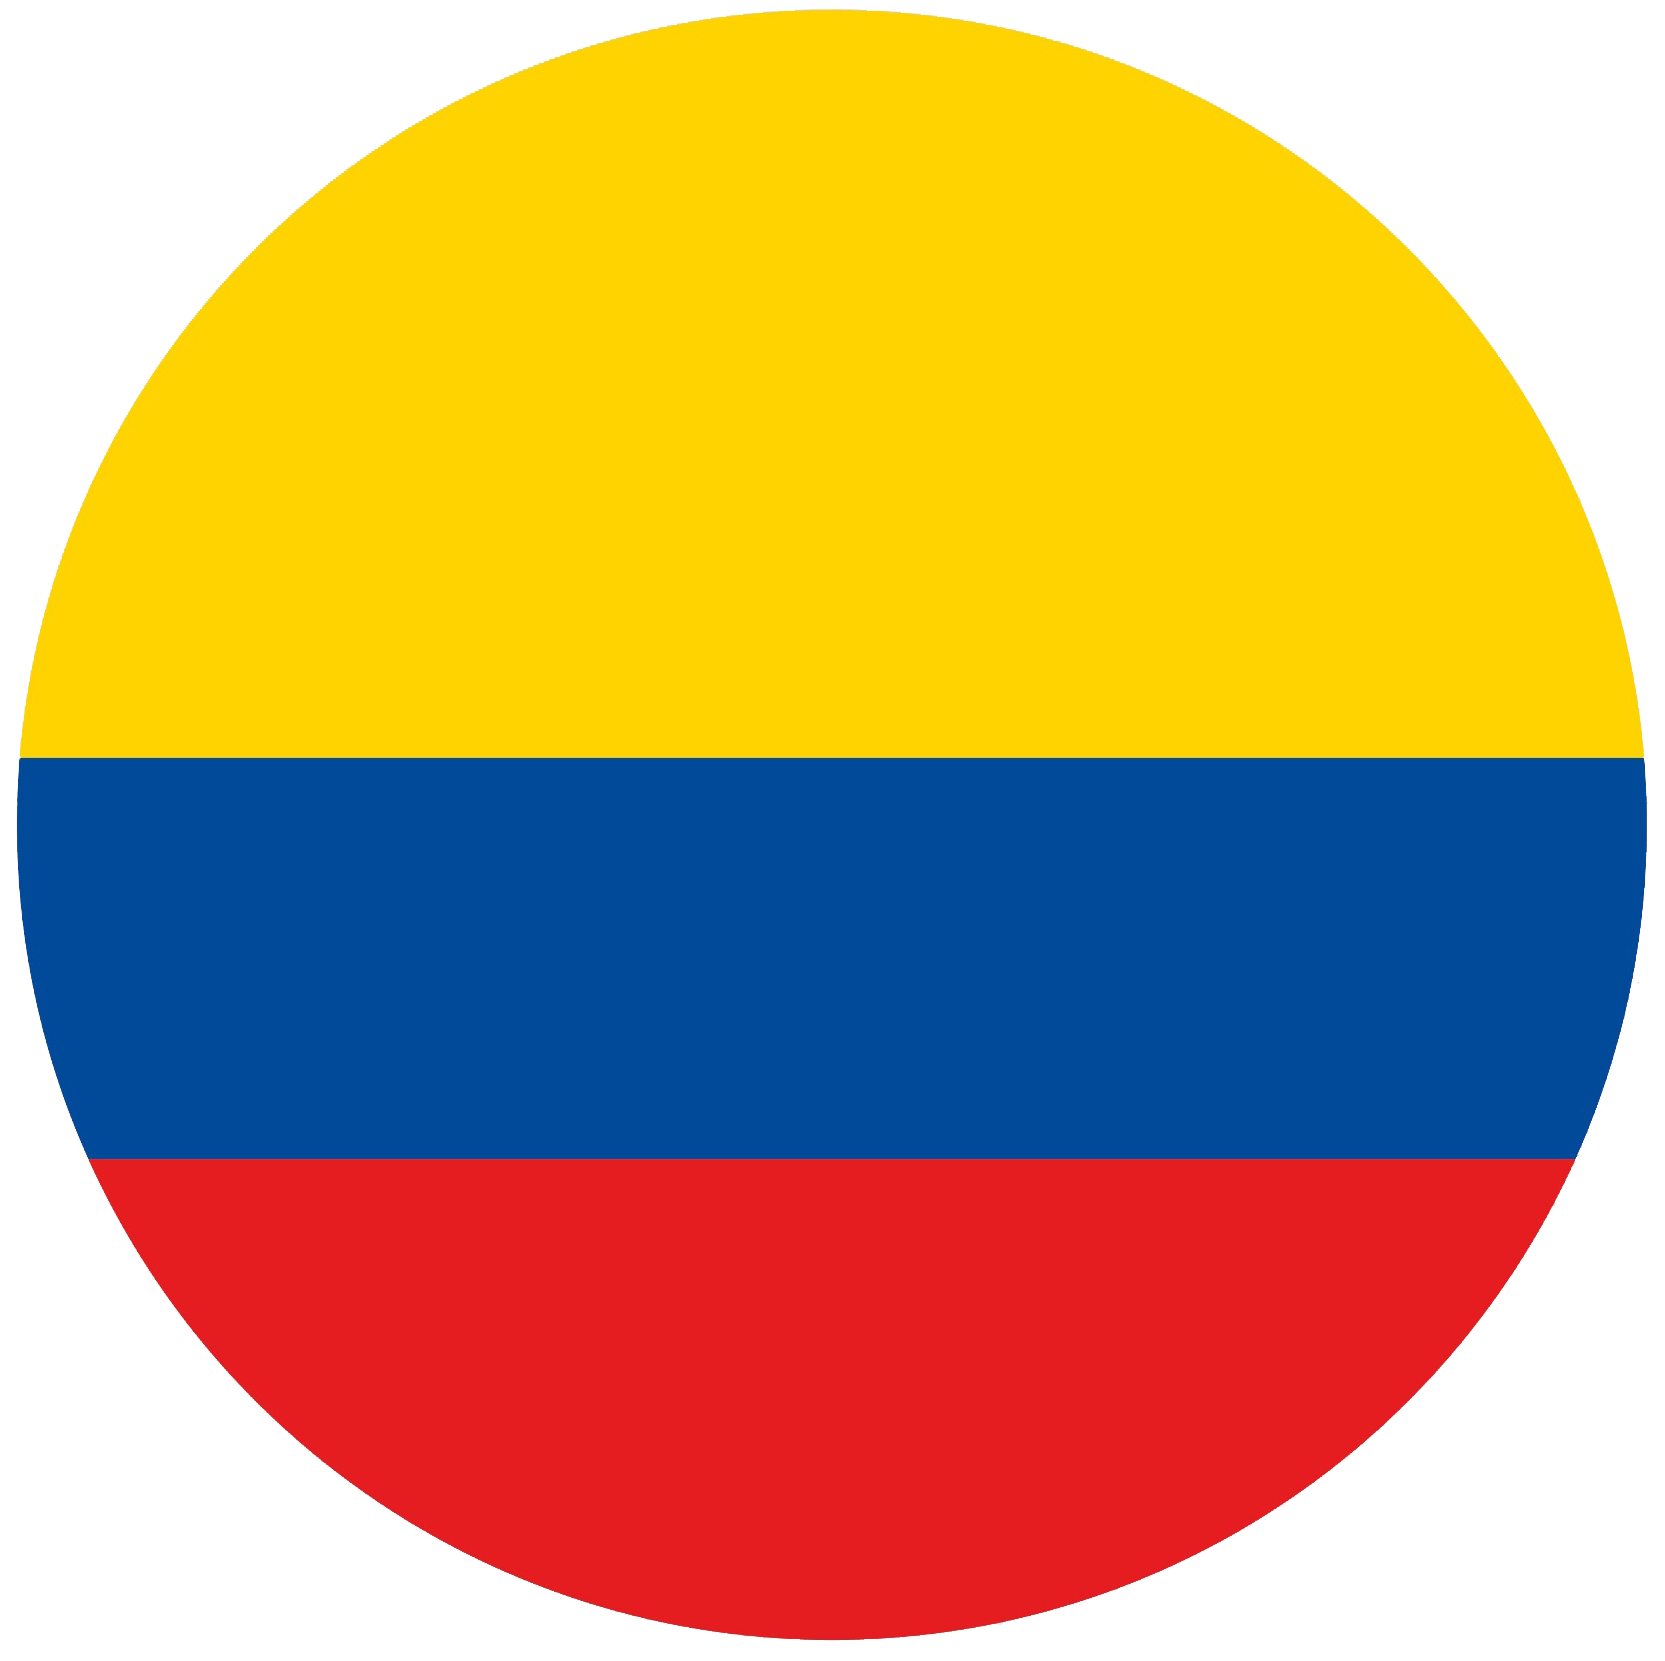 Image of the Colombian flag, a tricolor representation in yellow, blue, and red, symbolizing the diverse language and cultural heritage of Colombia.